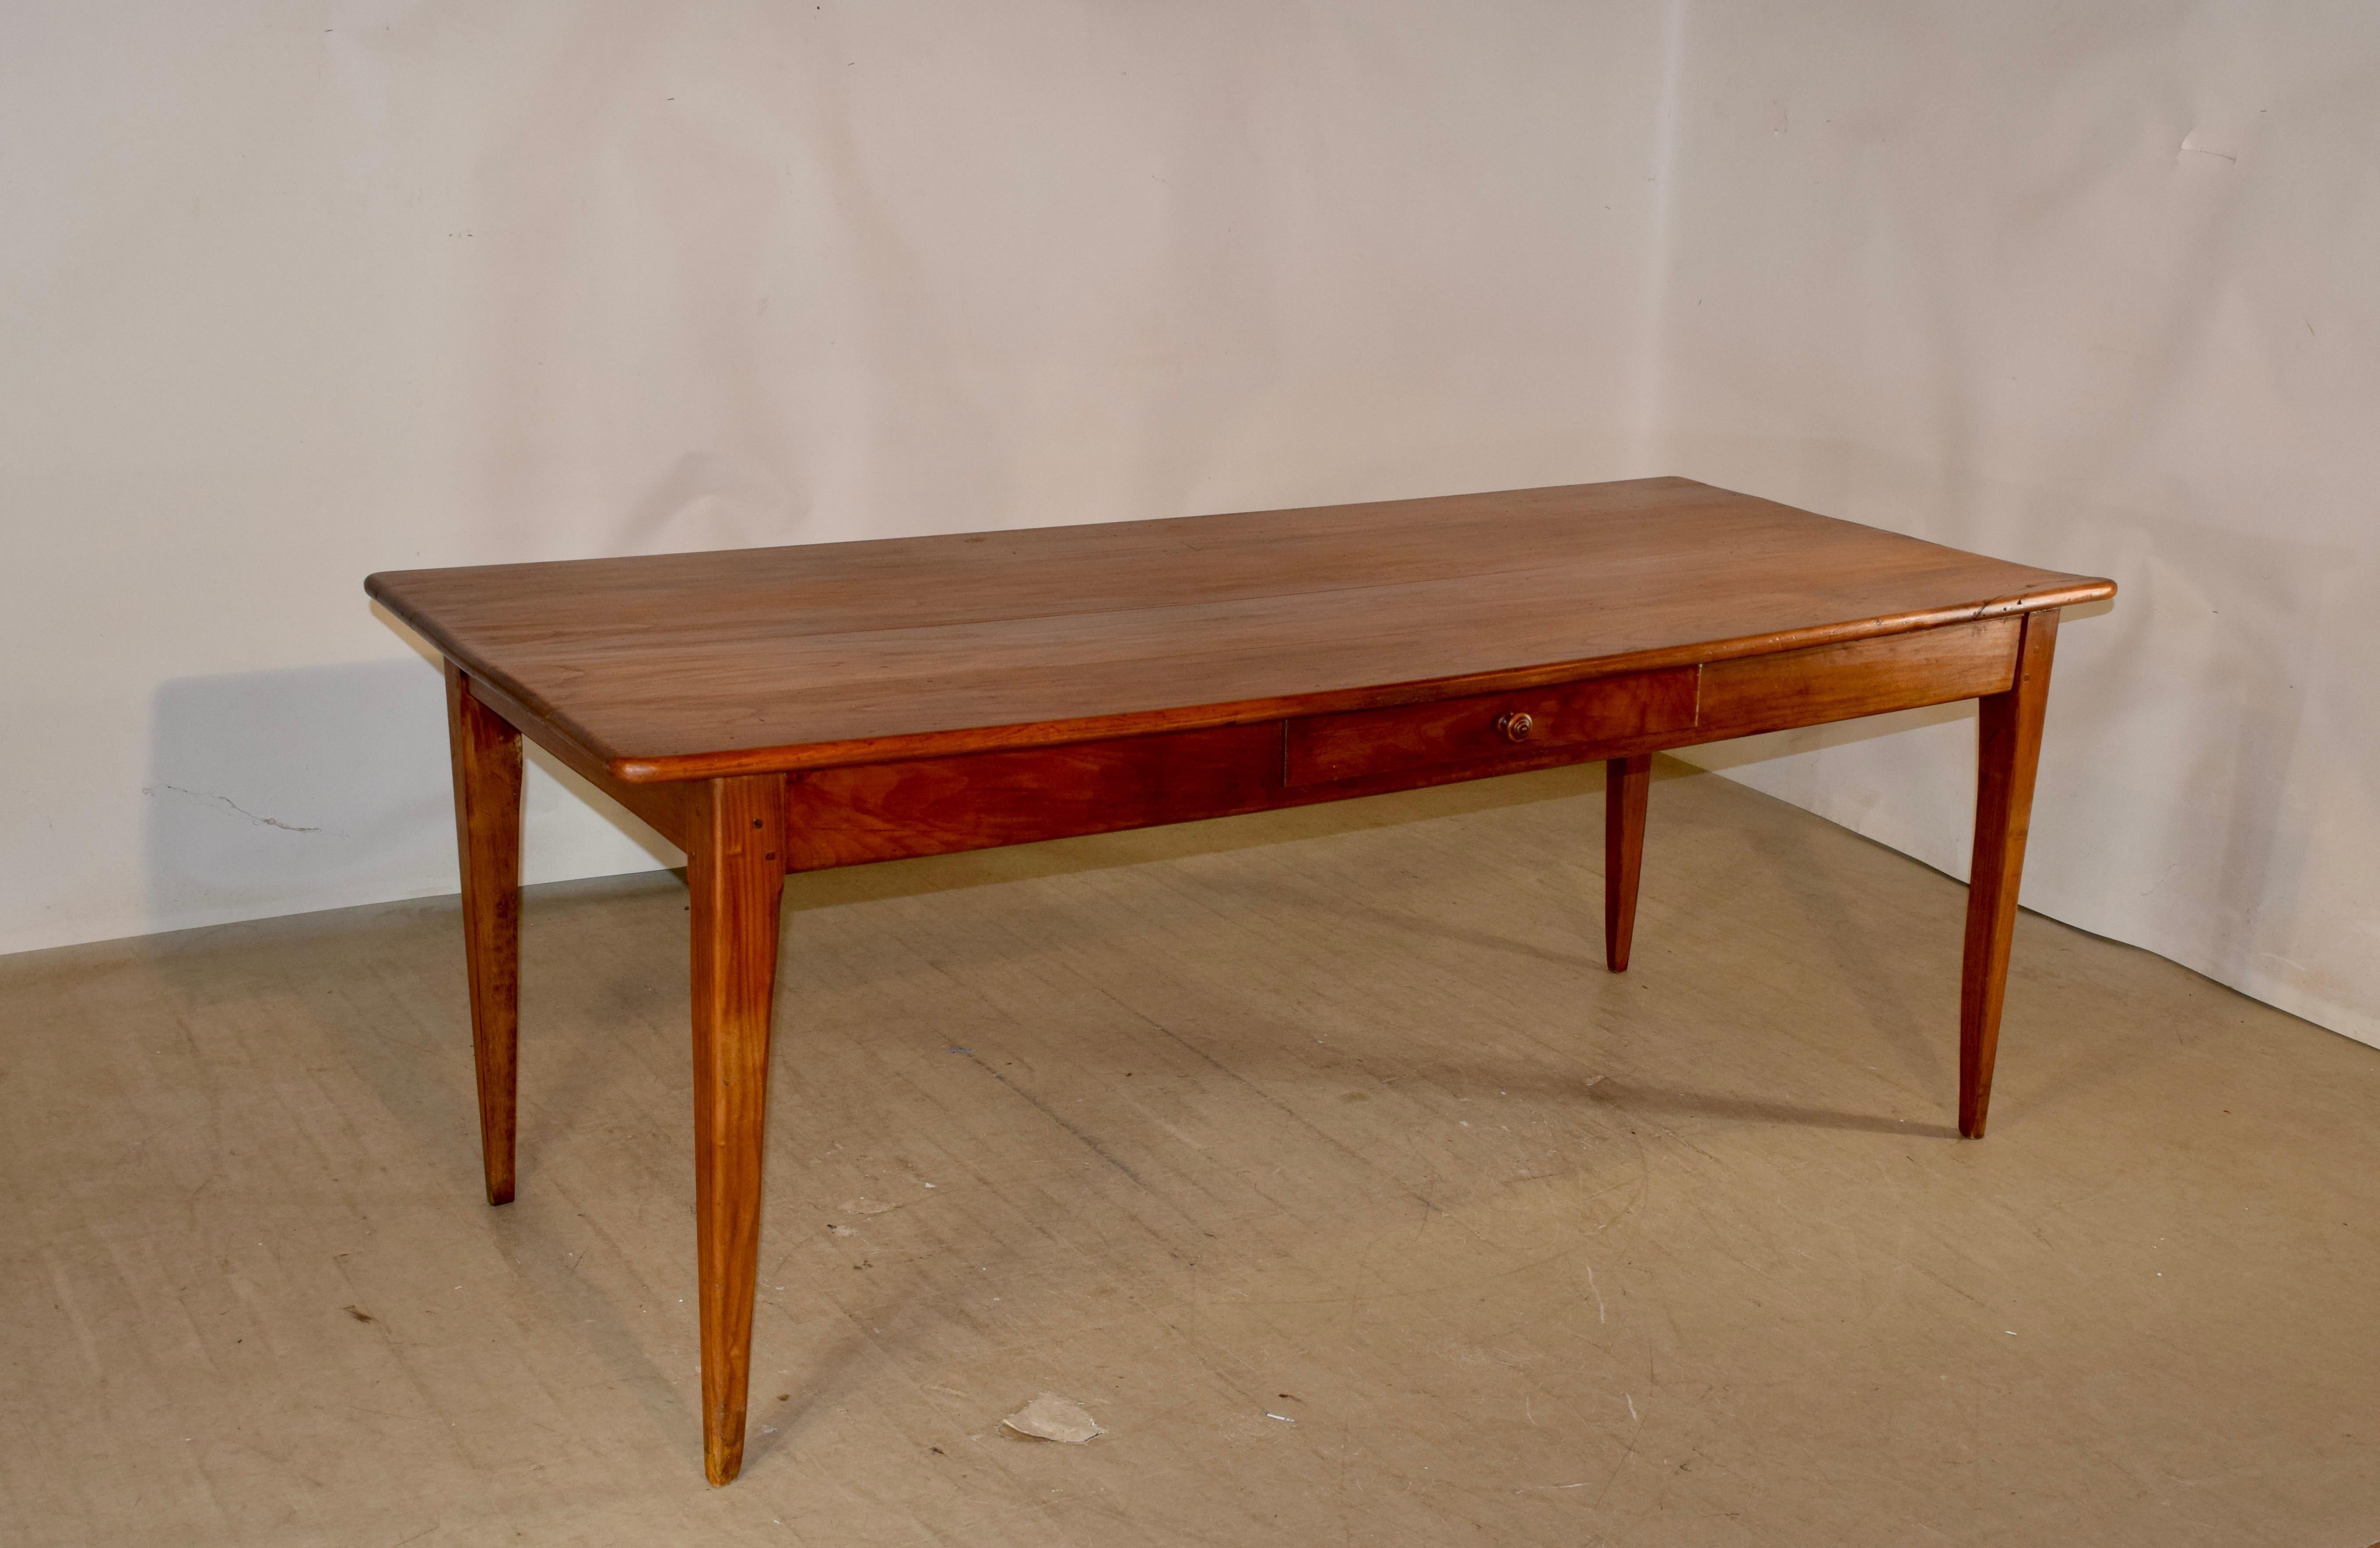 Late 18th century cherry farm table from France with a four plank top, which has marvelous graining and an old repair to one corner which is very sturdy. The apron is simple and contains a single drawer on one side, and the table is supported on